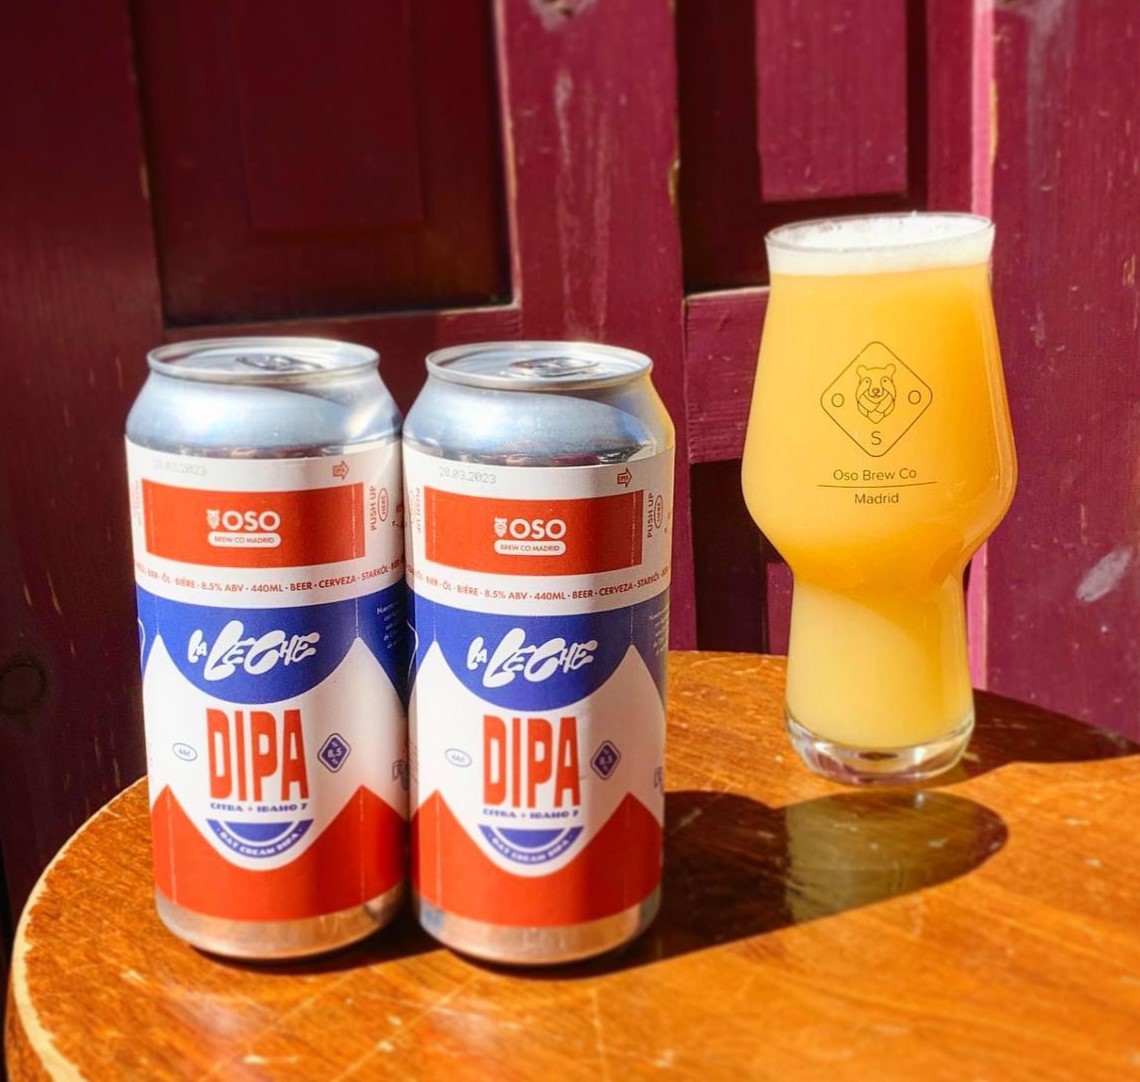 First up on tap & in cans at our @osobrewco Tap Takeover - La Leche DIPA: Citra + Idaho 7! 🍊🥤💥🥤🍊 This 8.5% Double IPA is brewed super smooth with a dose of lactose and oats, then hopped with 30g/L of Citra and Idaho 7 for maximum tropical notes. 🤙